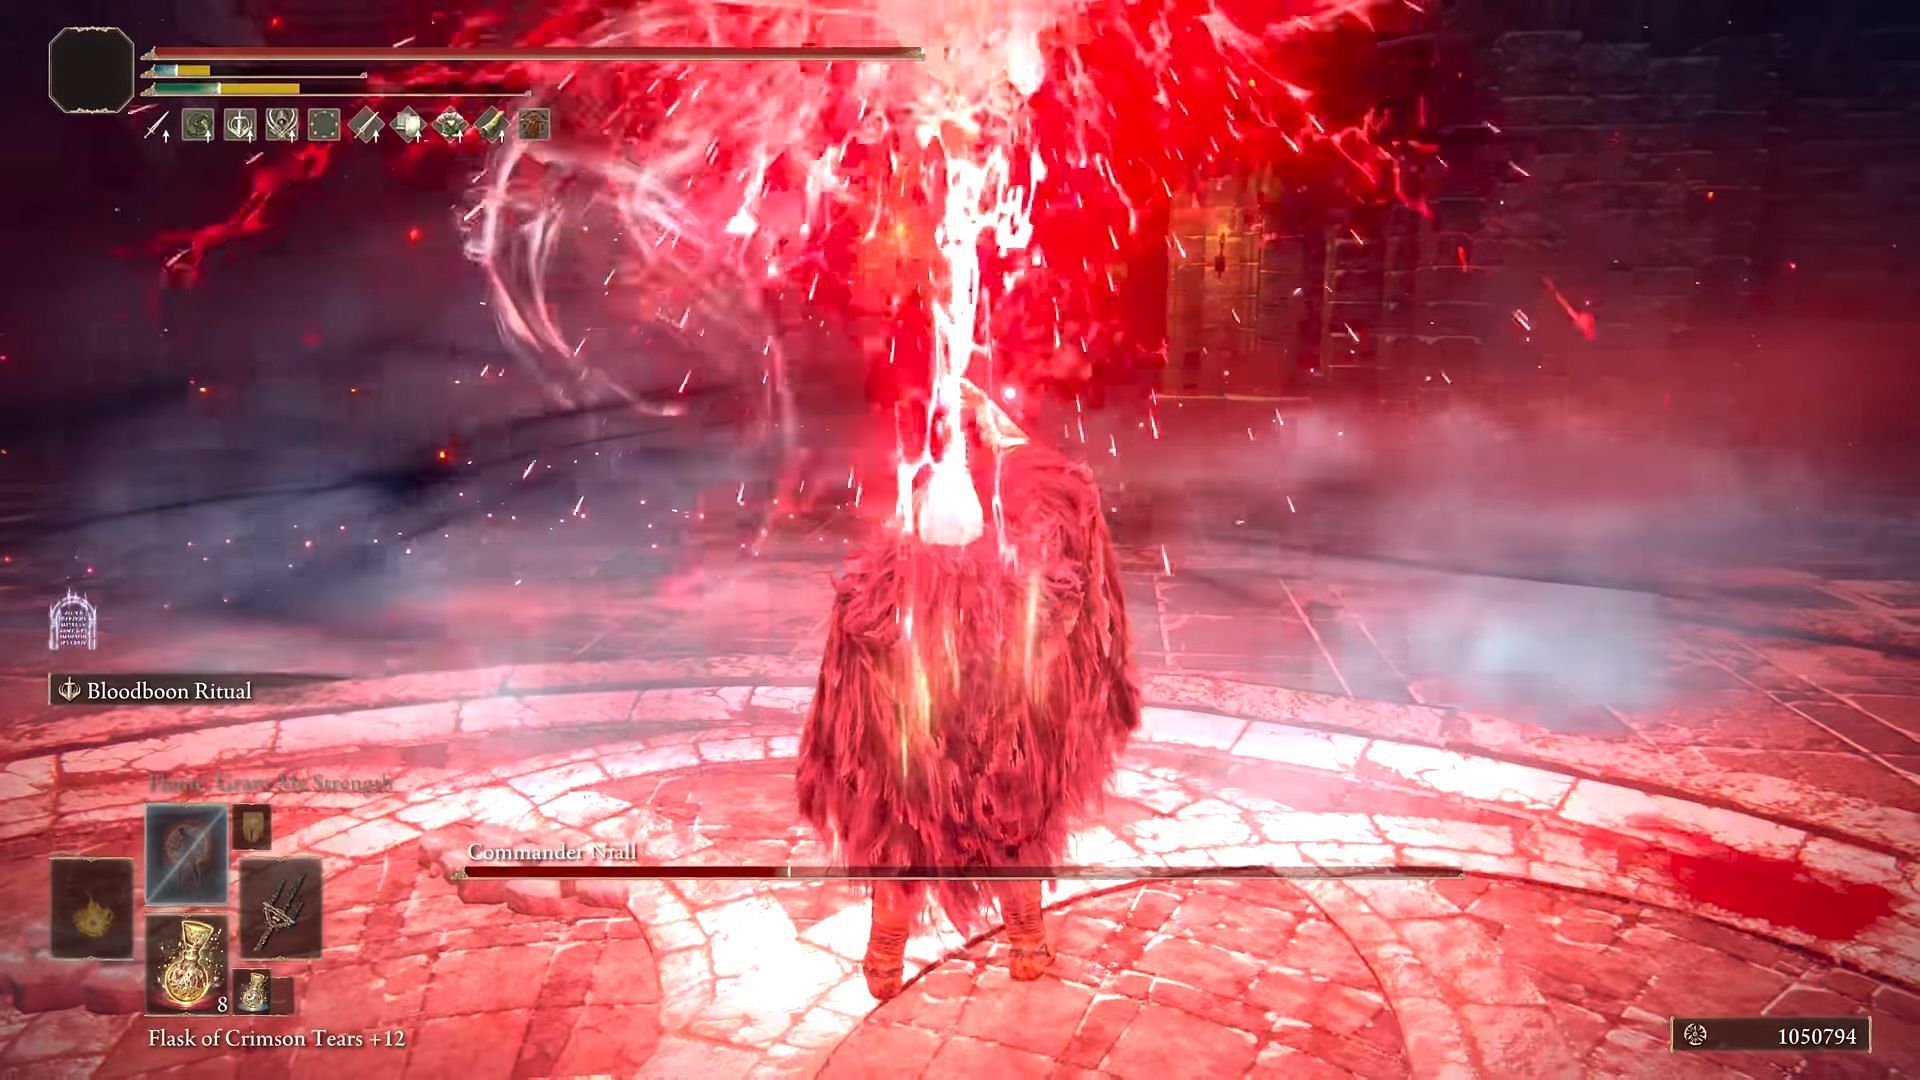 Bloodboon Ritual is one of the strongest Ash of Wars in Elden Ring (Image via FromSoftware || YouTube/Your Average Gamer)